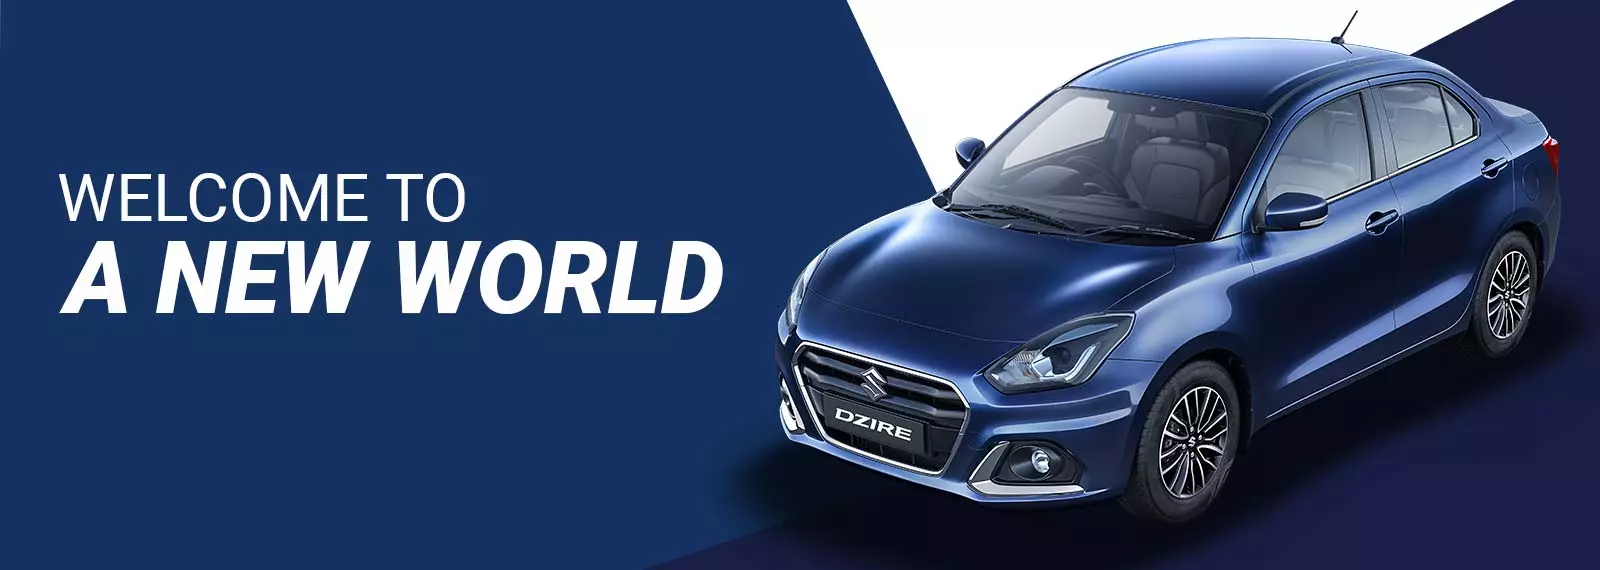 dzire-banner Eastern Motors Chingmeirong West, Imphal